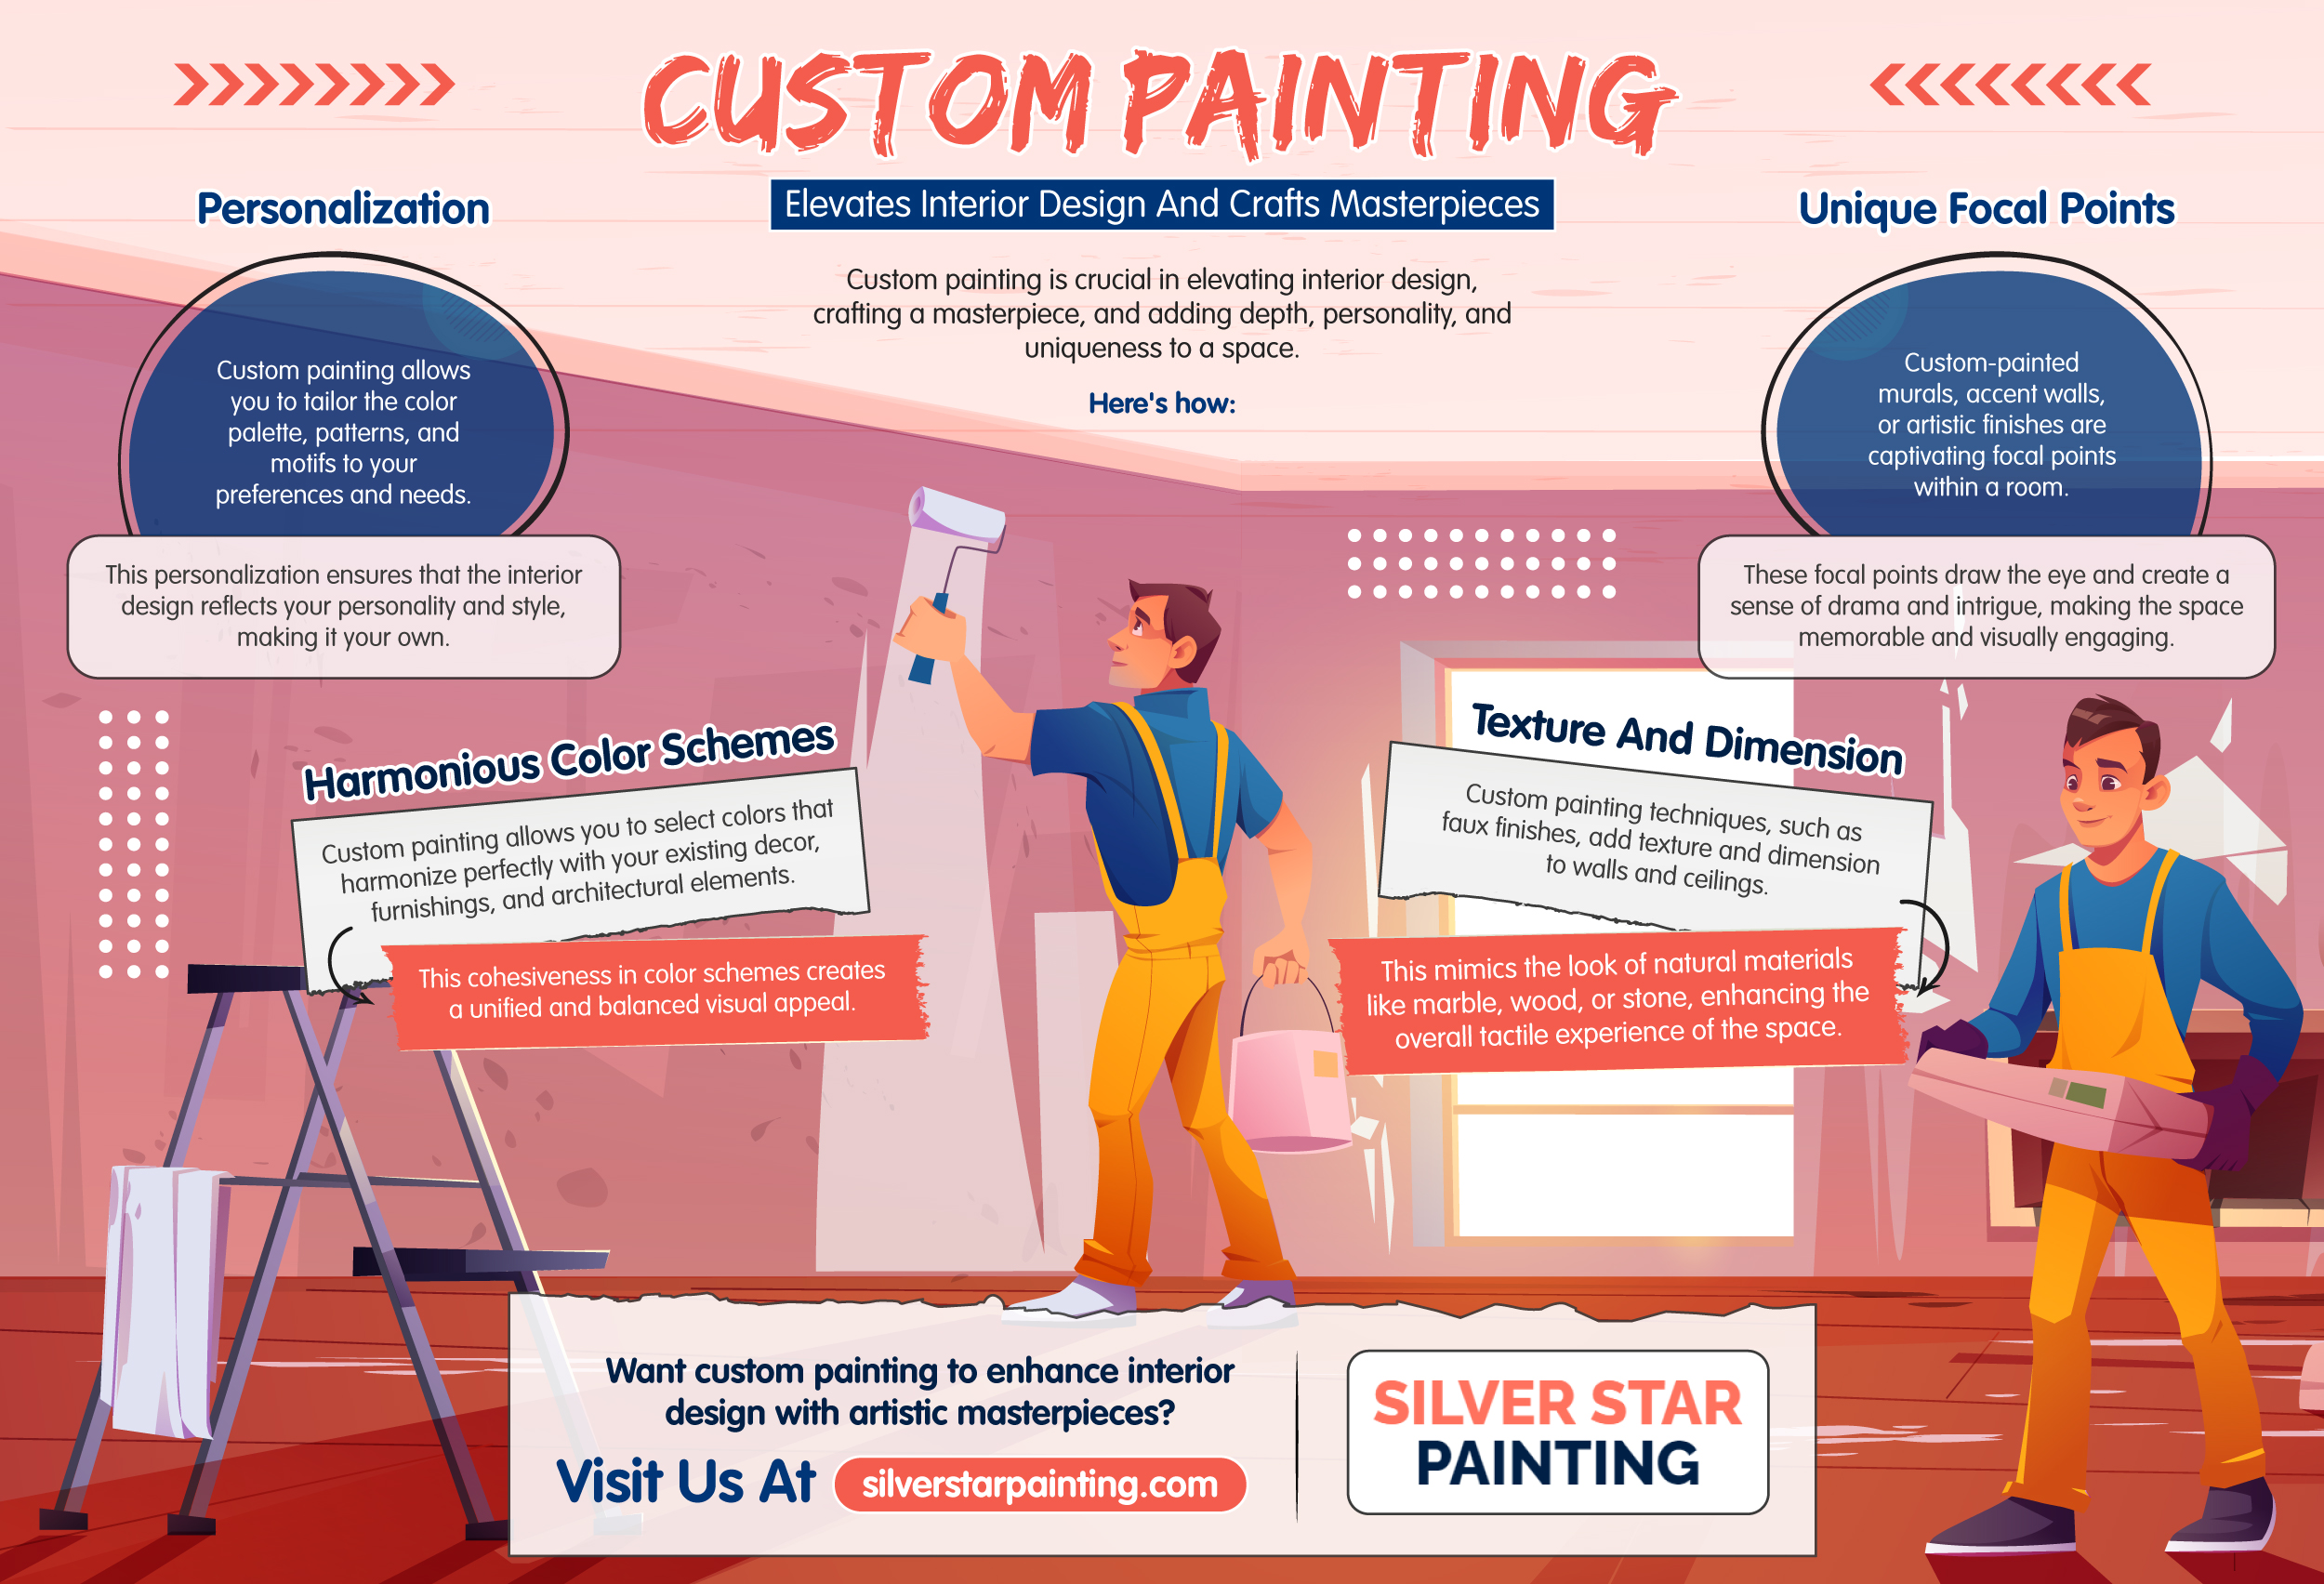 SilverStarPainting_1stMonth_Infographic